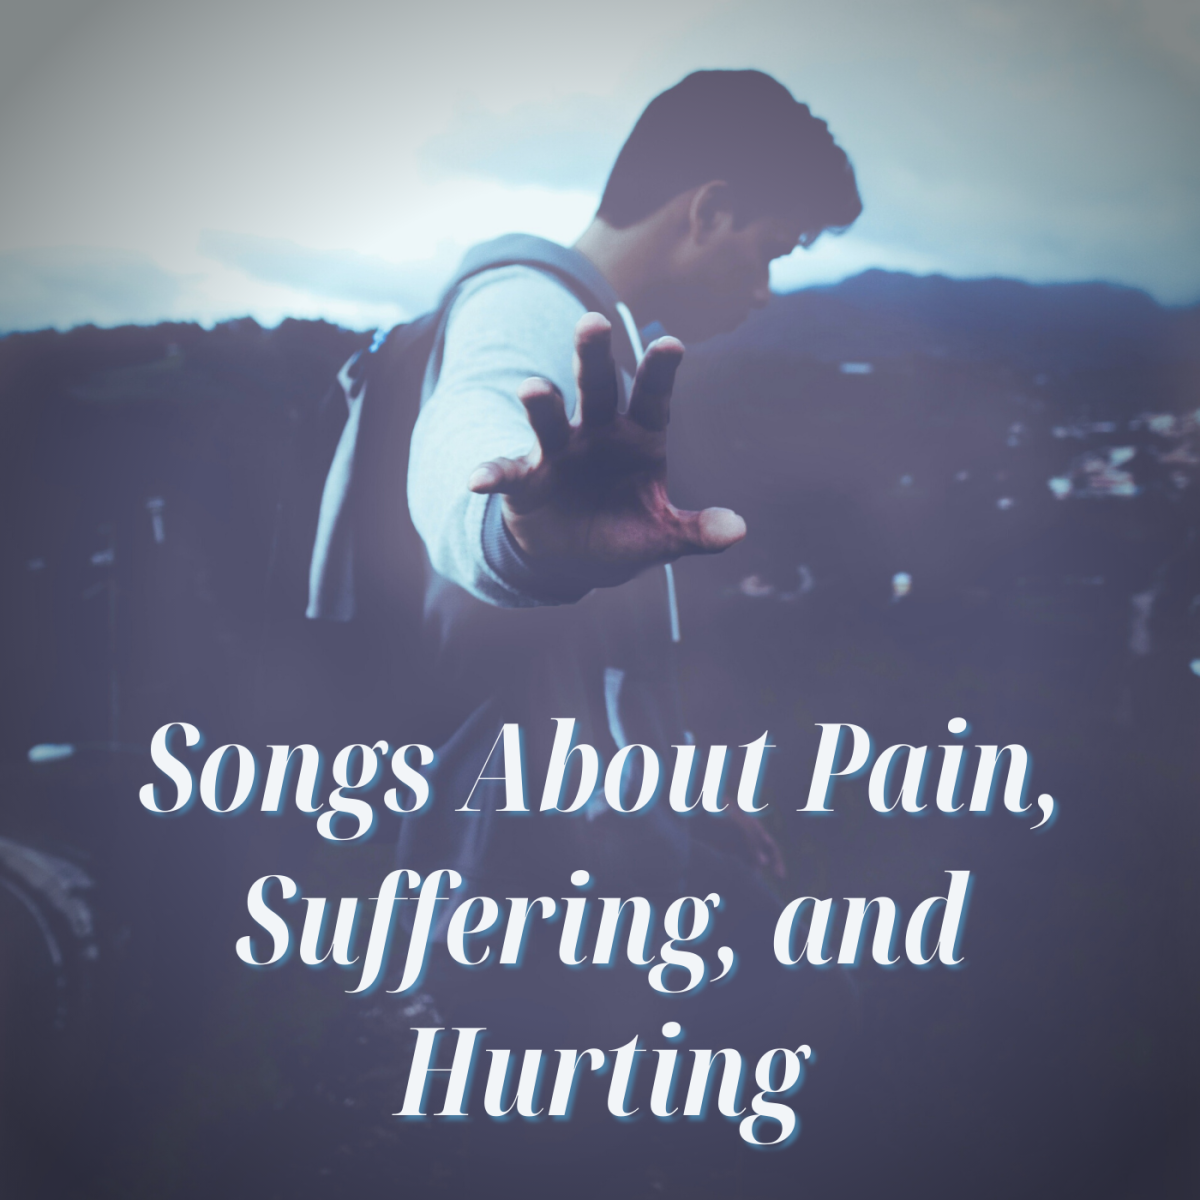 48 Songs About Pain, Suffering, and Hurting